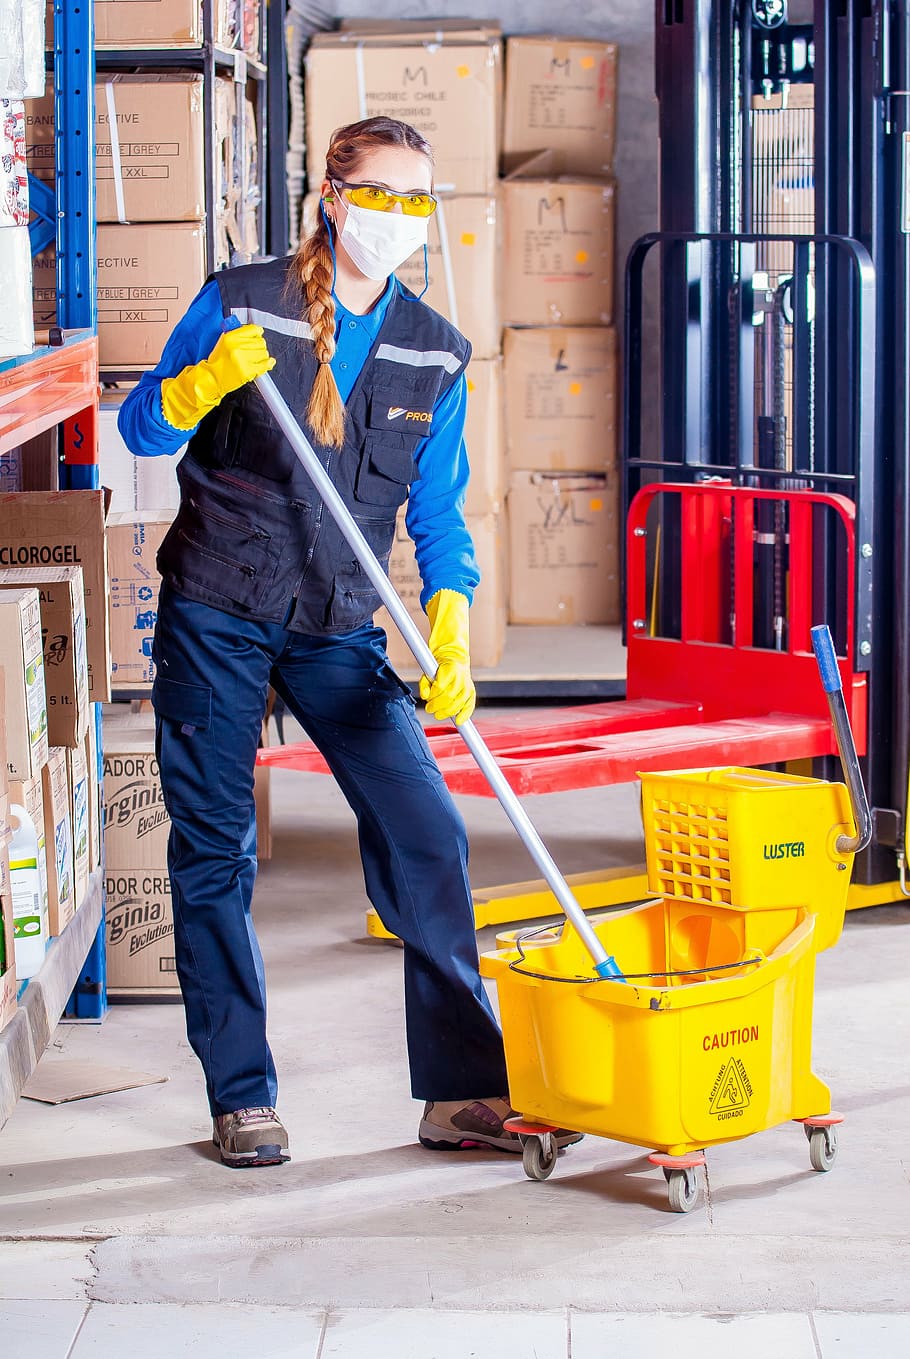 woman holding mop, industrial, security, logistic, work clothes, industrial safety, protective goggles, vest, worker, mandatory